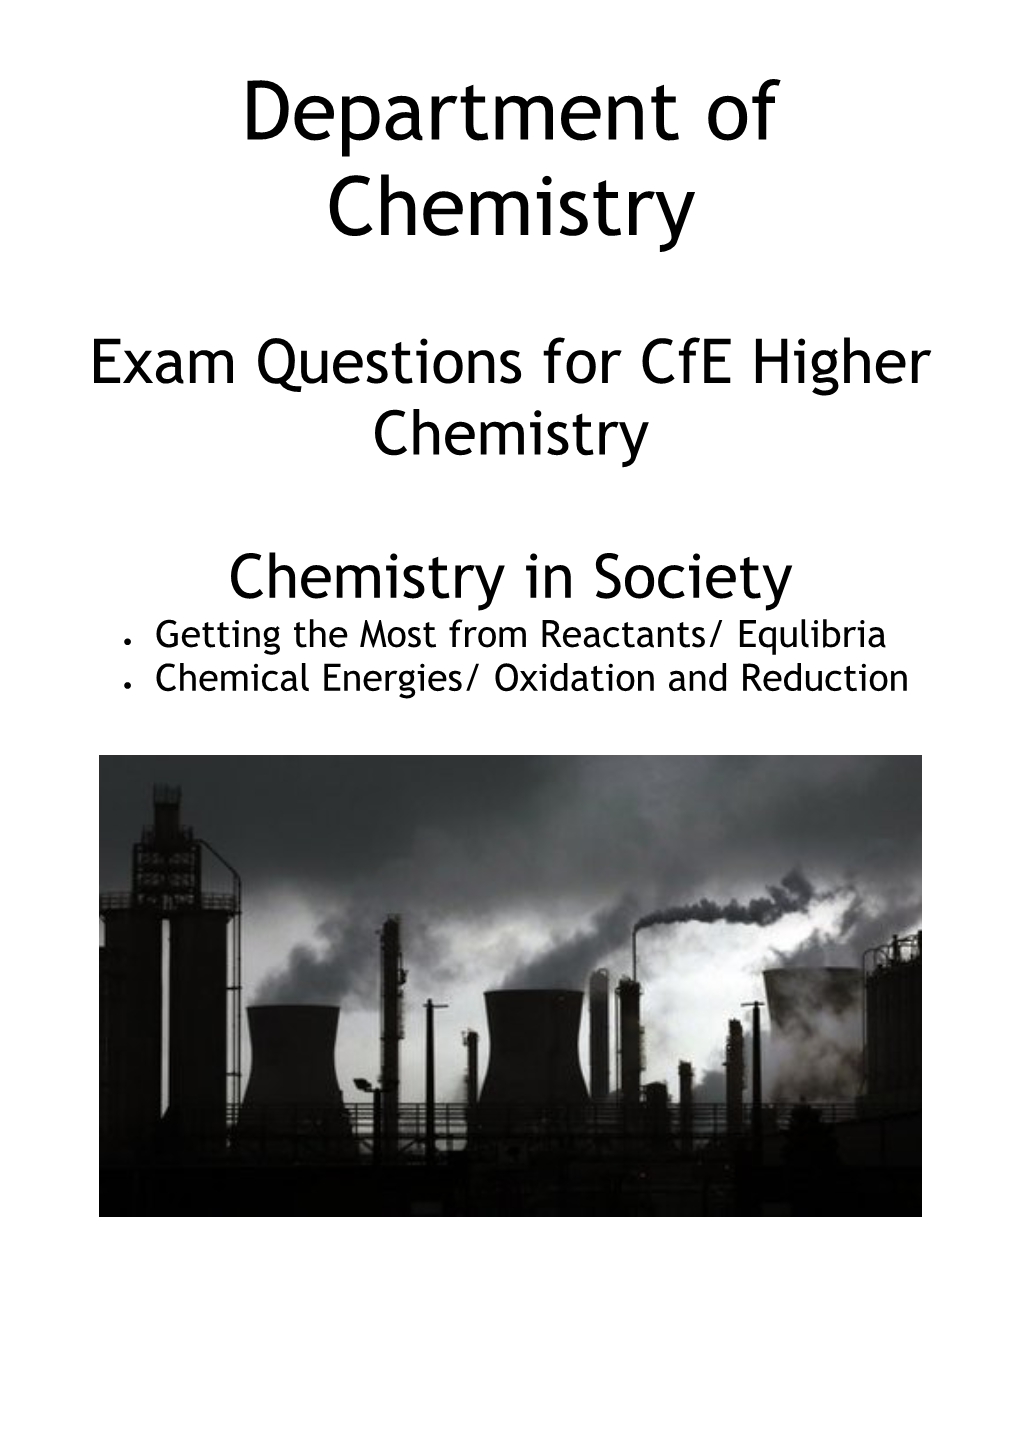 Exam Questions for Cfe Higher Chemistry